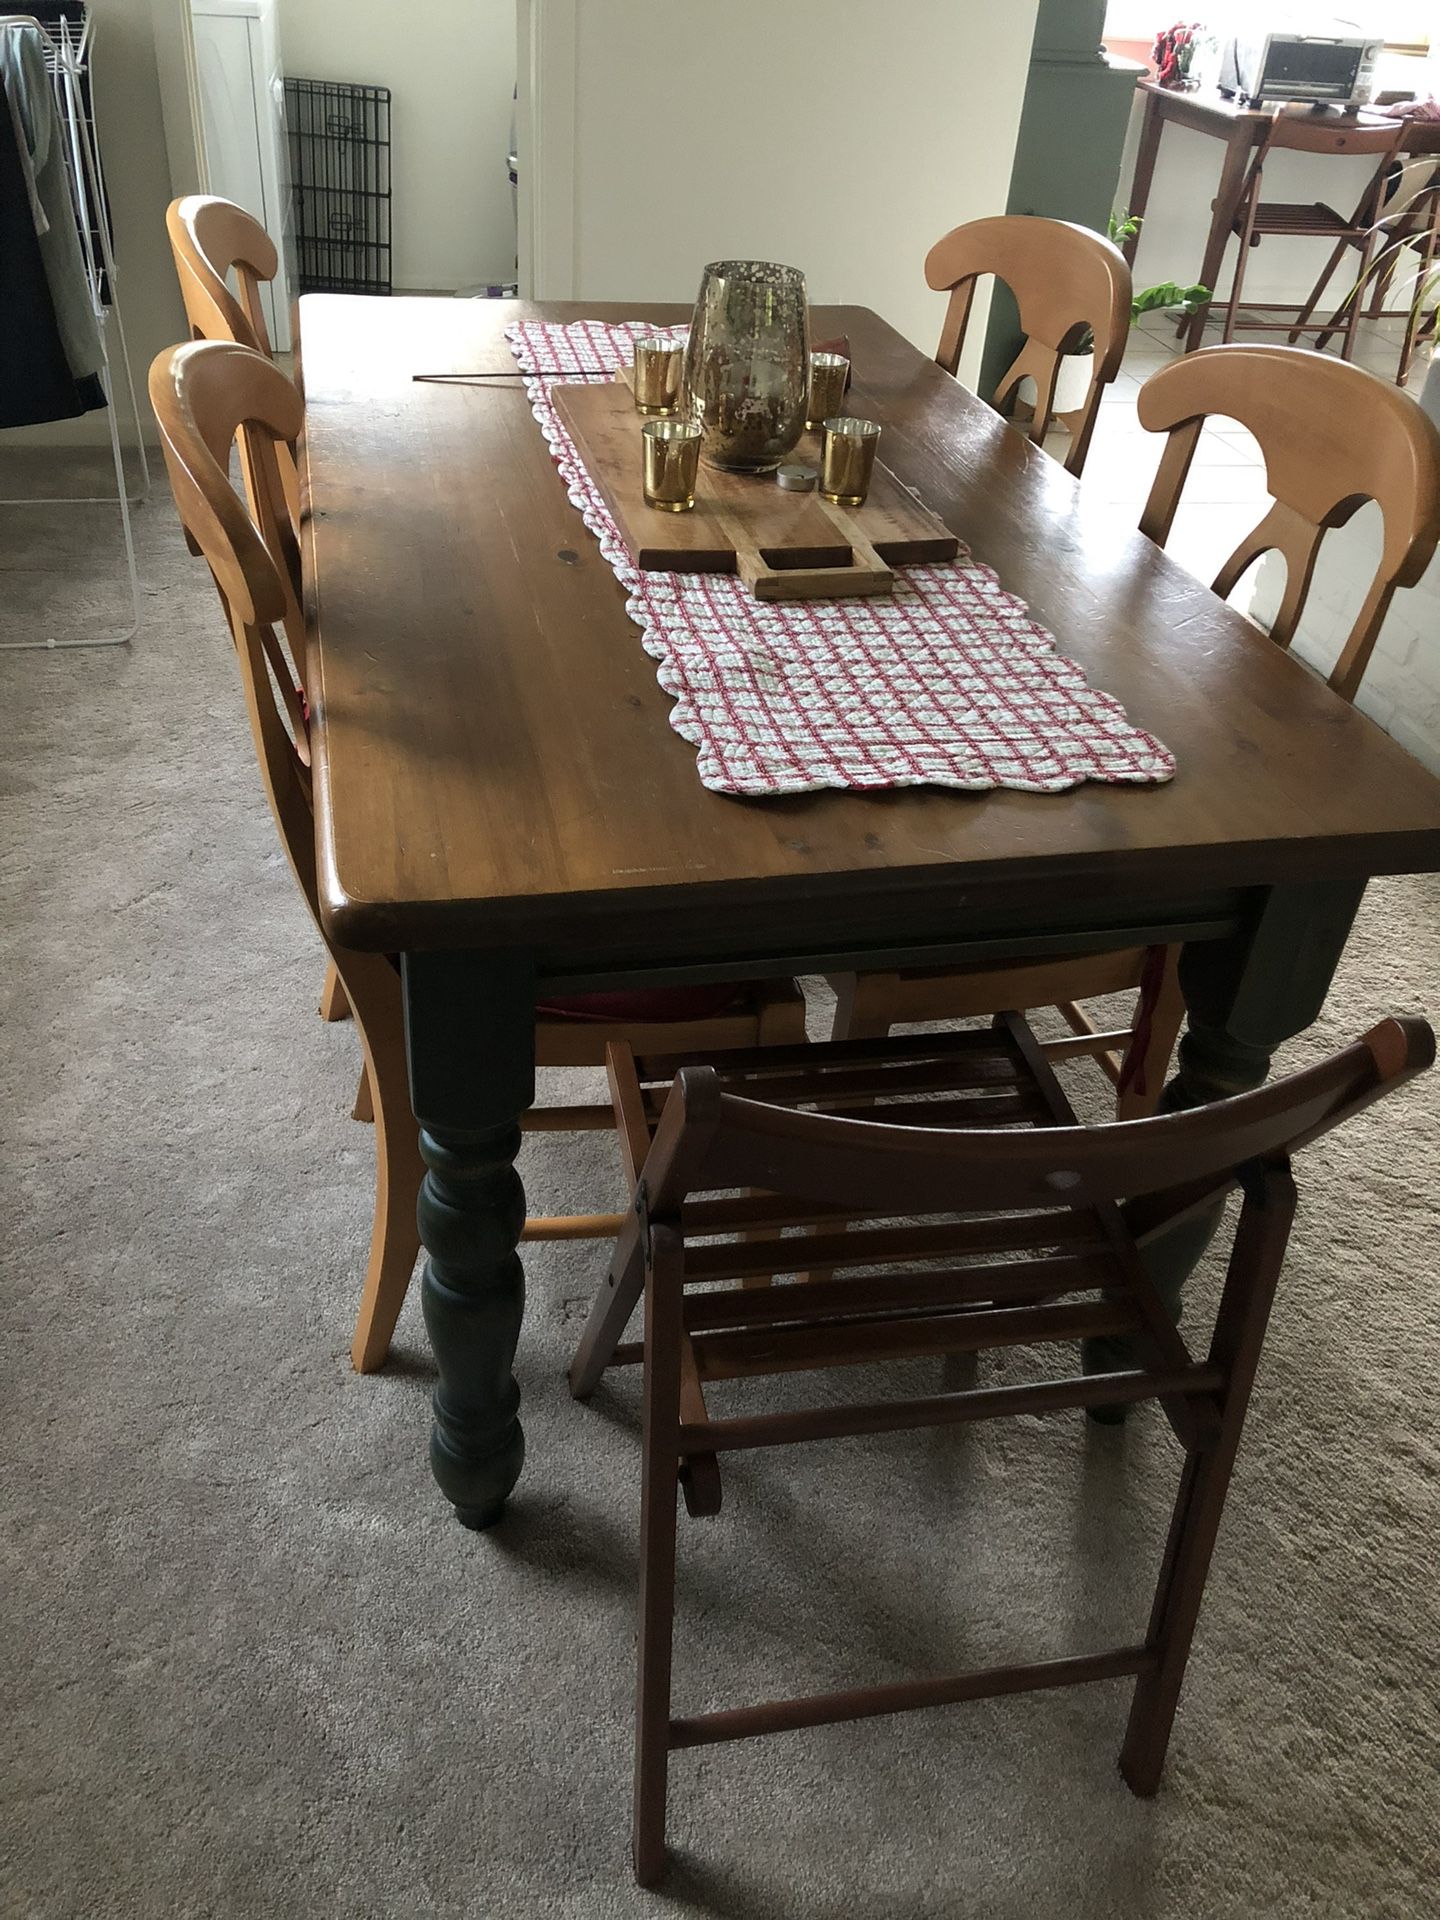 Pottery Barn Kitchen Table And Matching Chairs (4)